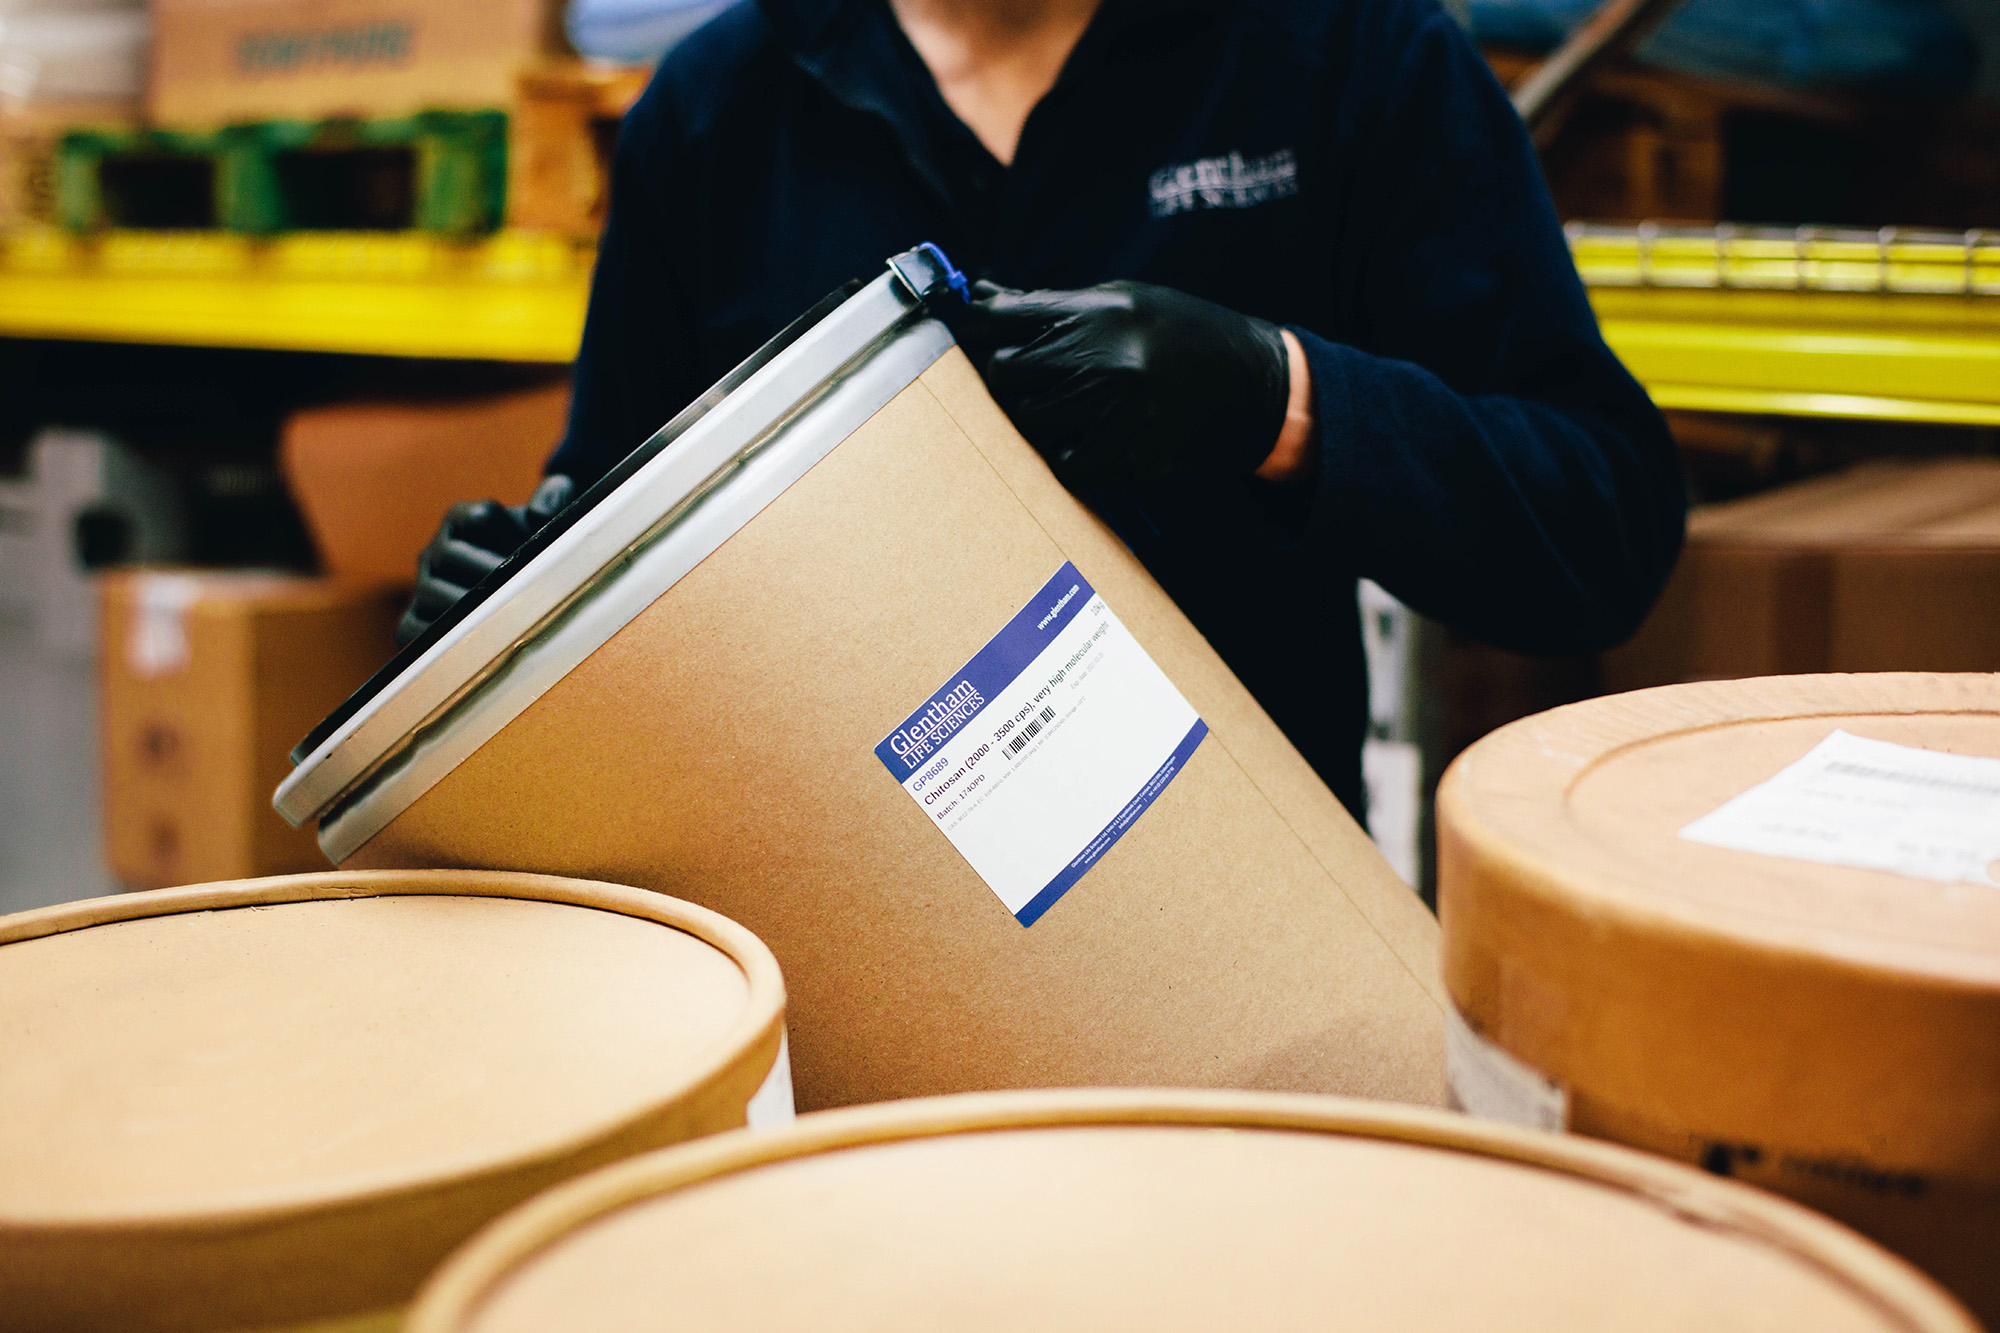 Photo of male warehouse worker lifting a 10kg drum containing Chitosan, the worker is wearing black gloves and a dark blue jumper. He has 3 other drums next to him.